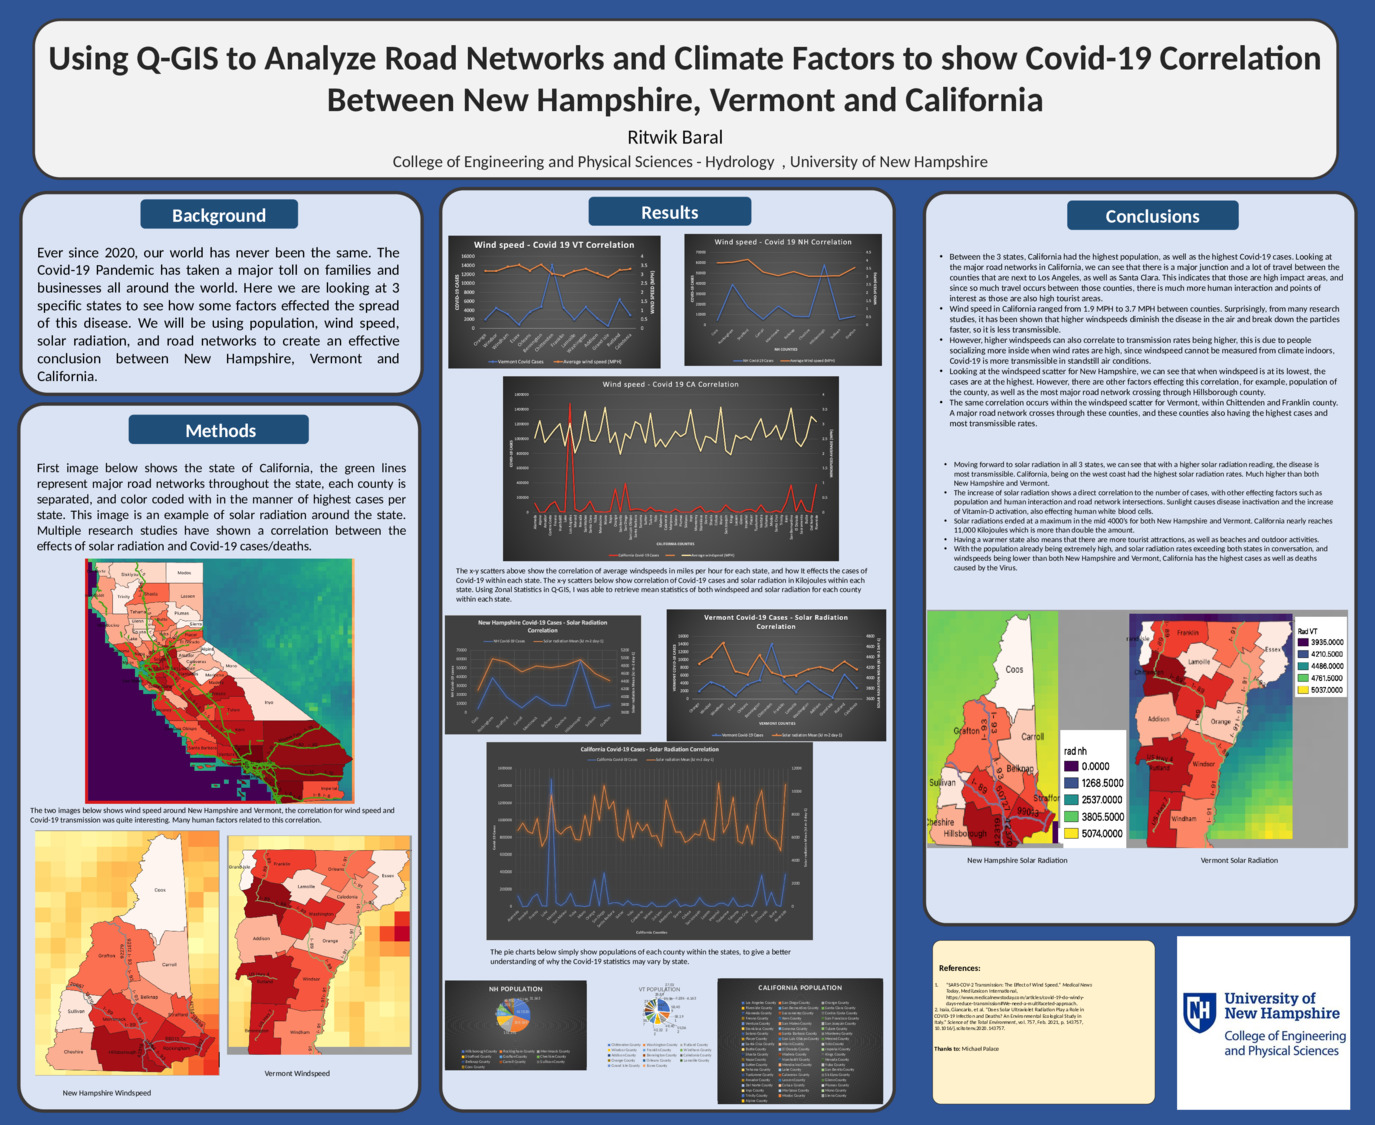 Using Q-Gis To Analyze Road Networks And Climate Factors To Show Covid-19 Correlation Between New Hampshire, Vermont And California by RitwikB